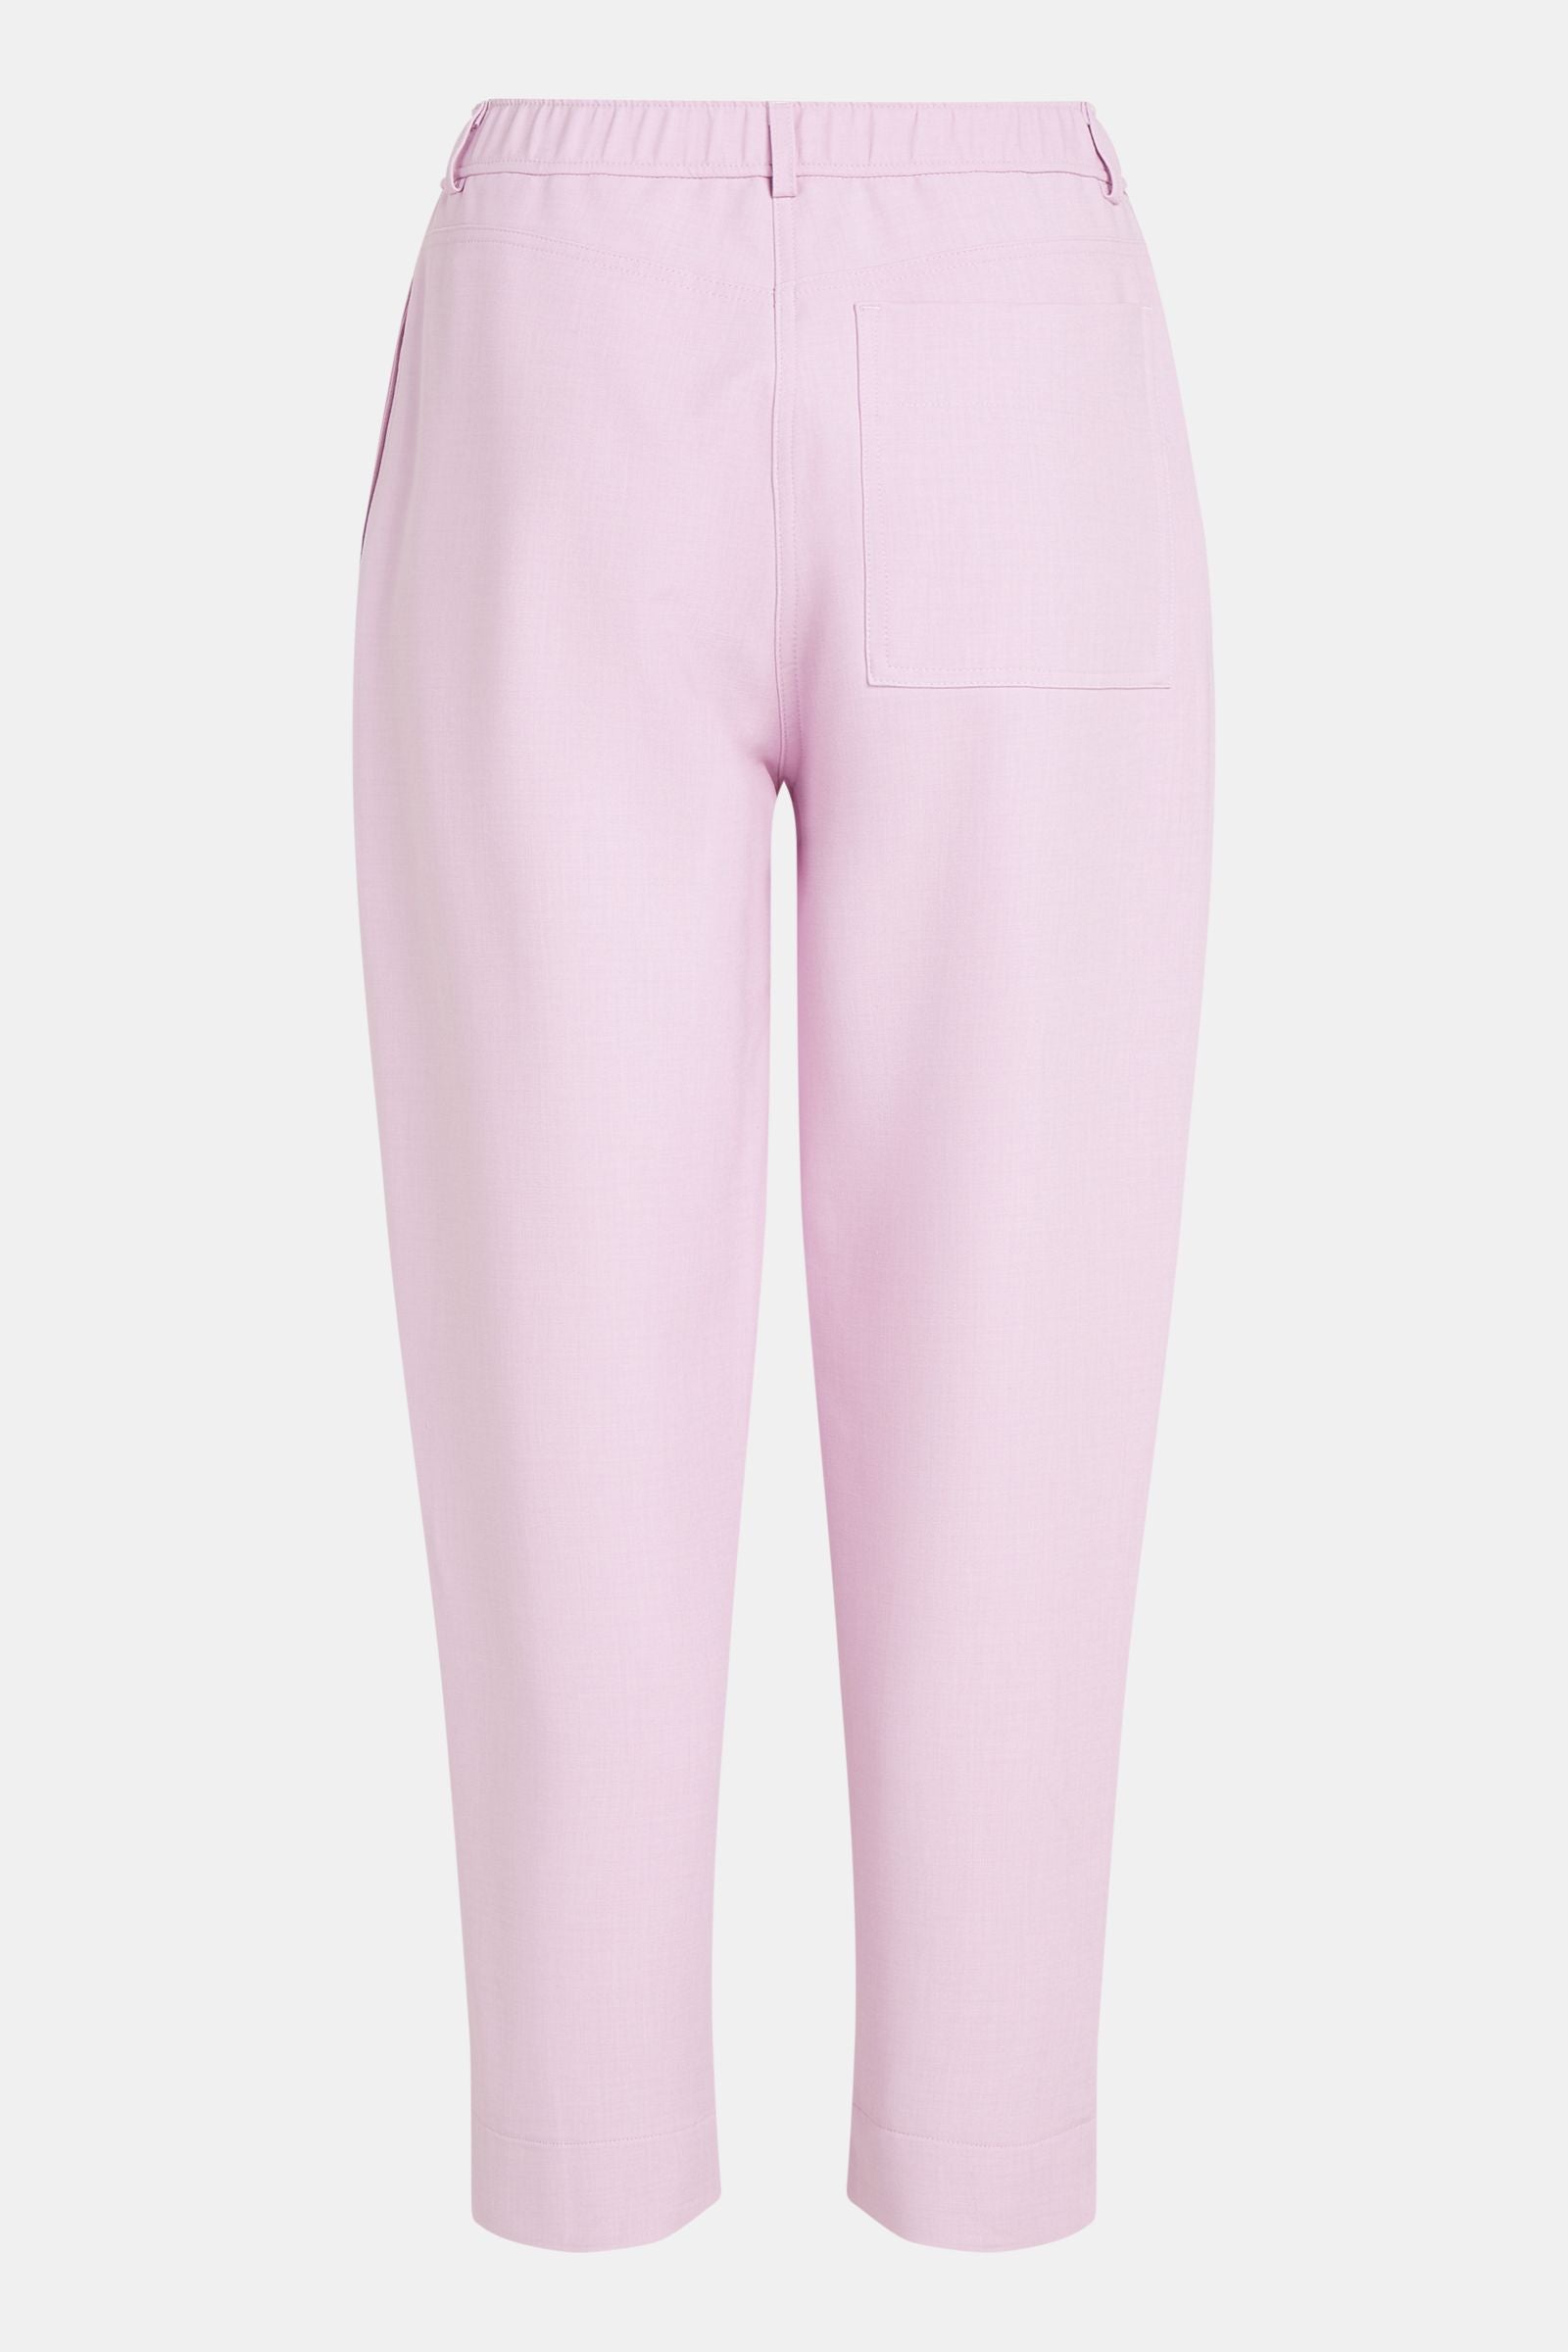 TROUSERS (S24N1473) ROSE